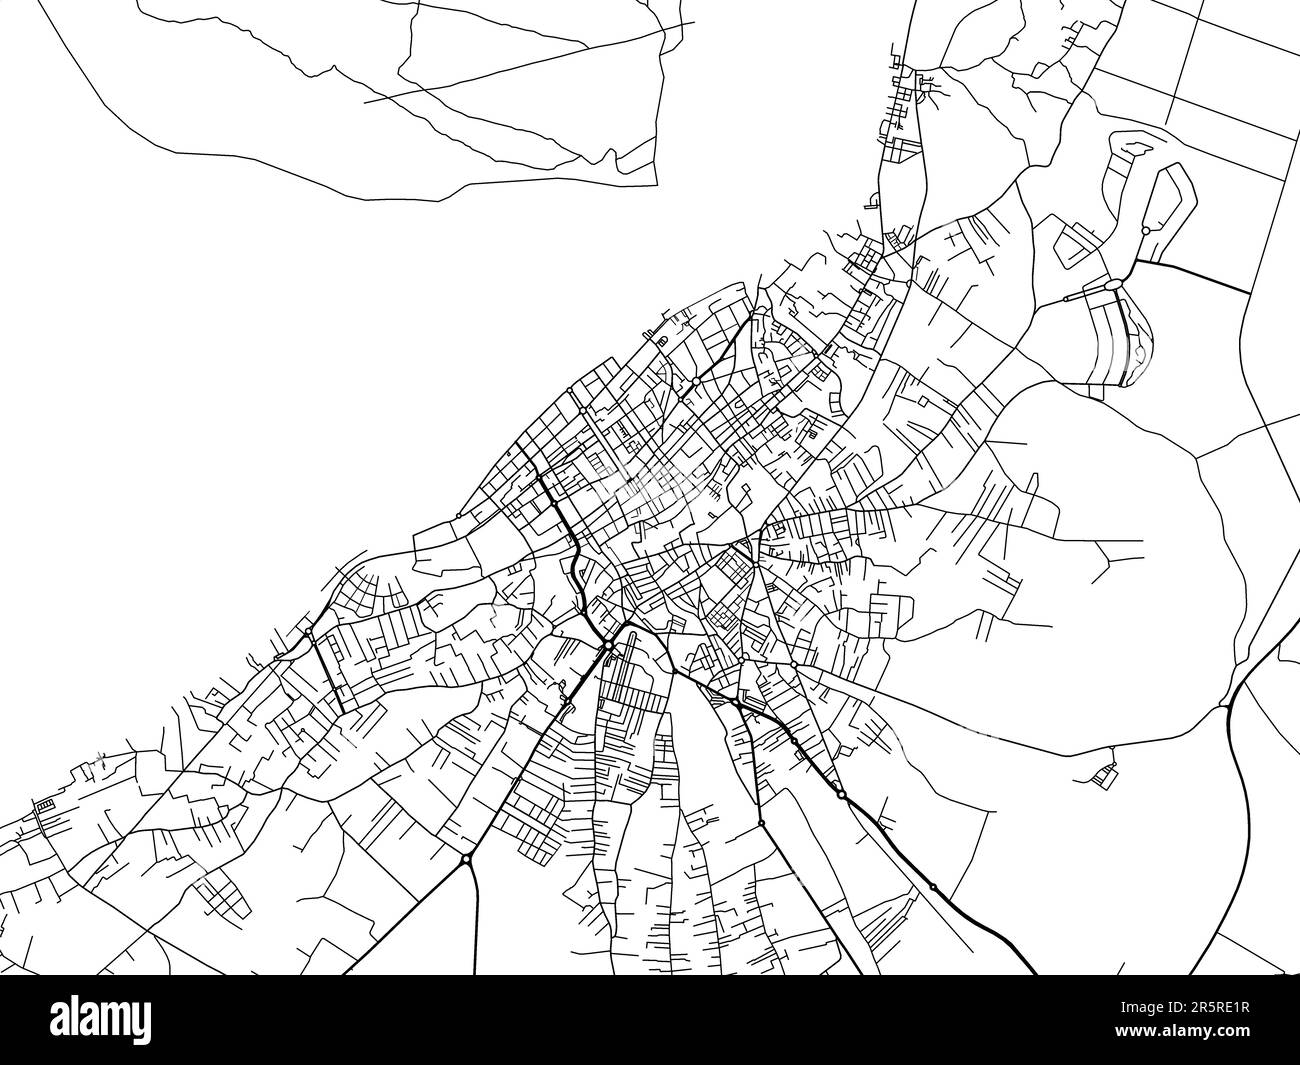 Vector road map of the city of  Sanlucar de Barrameda in Spain on a white background. Stock Photo